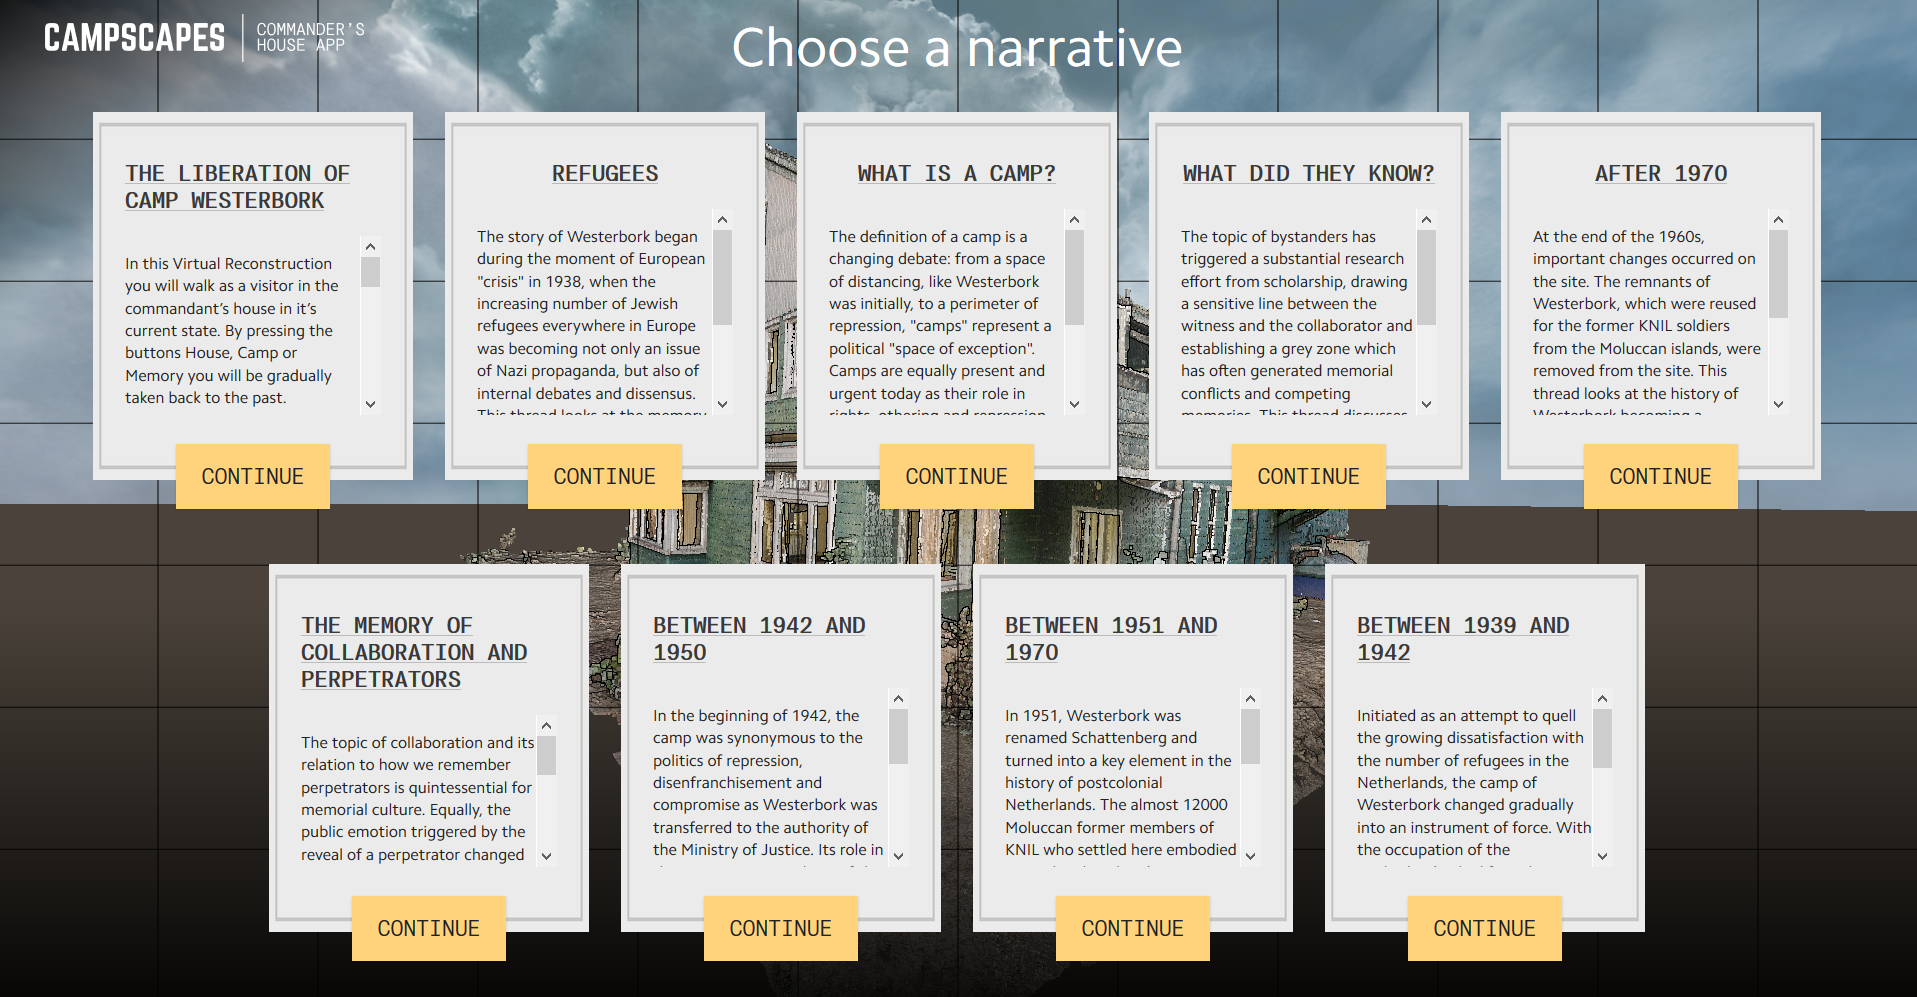 Selection screen for narratives, covering different perspectives on the Commander's house.